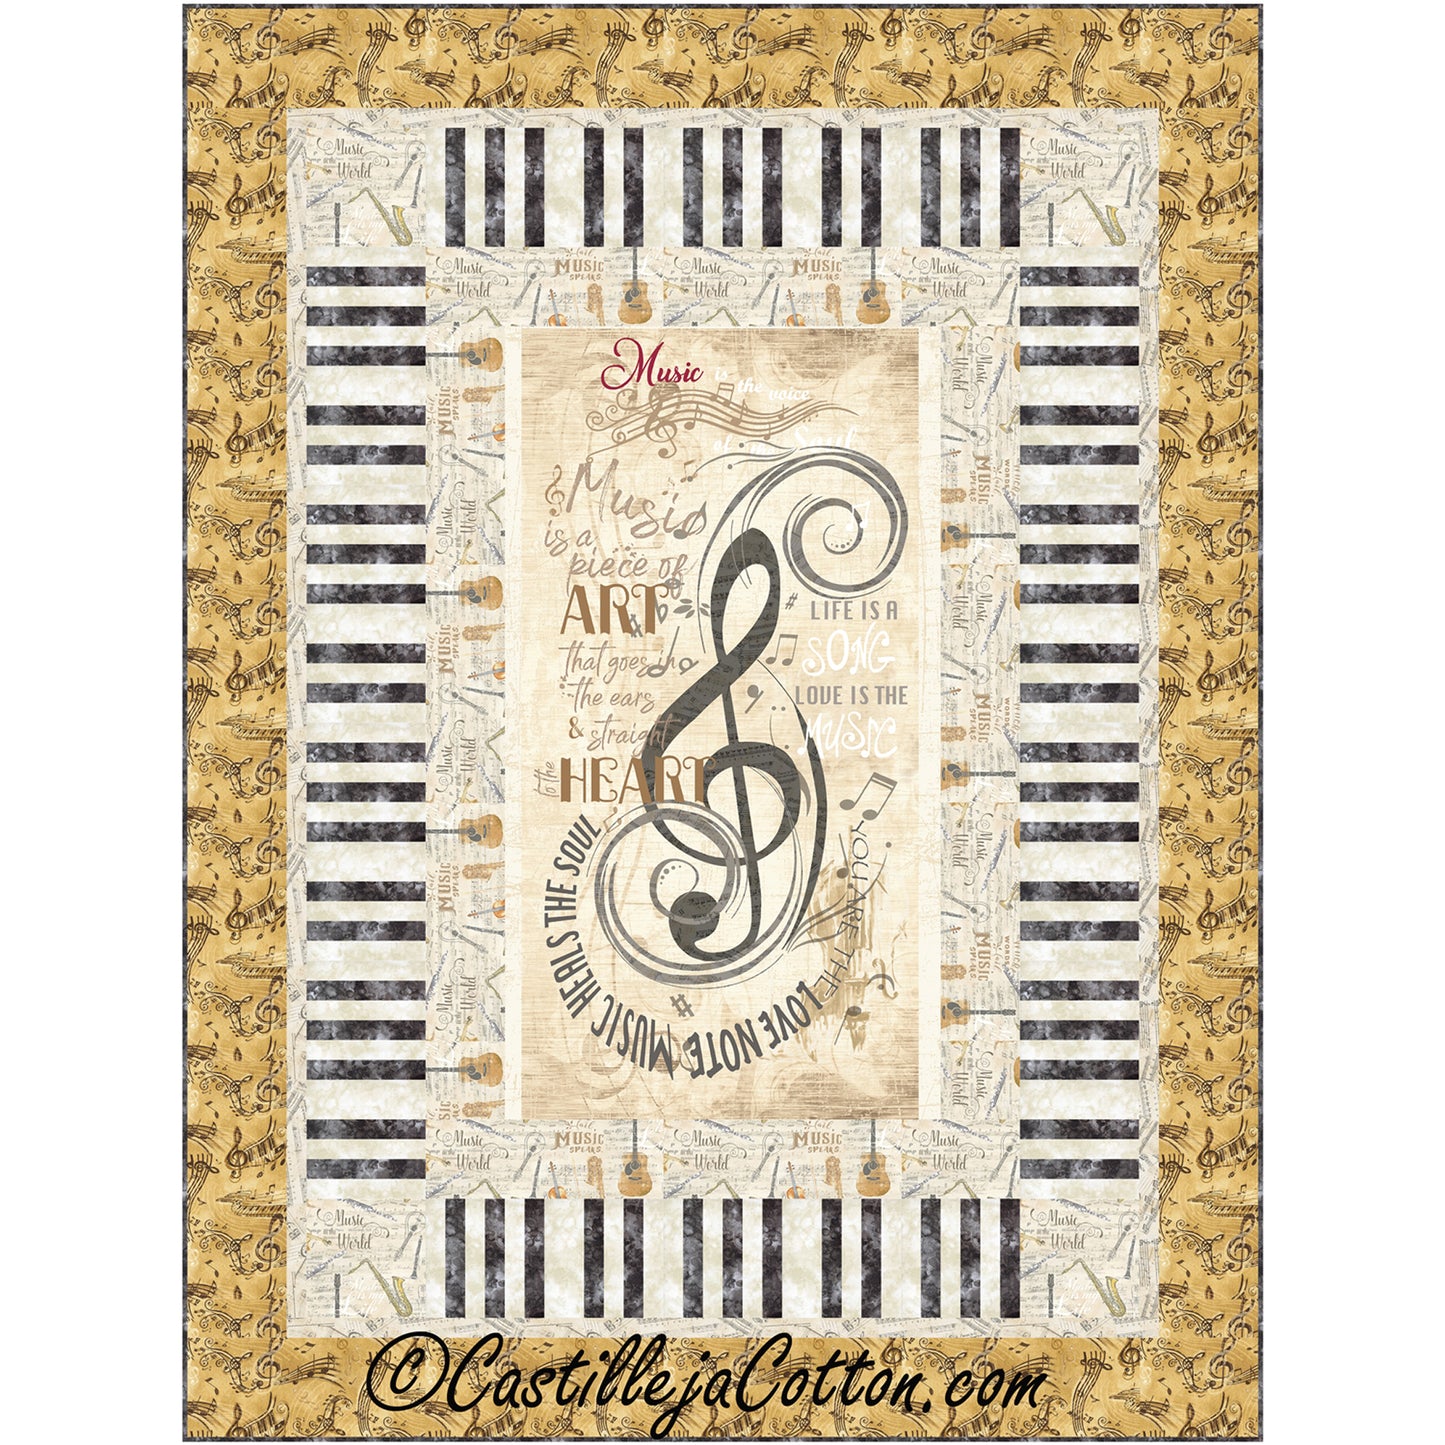 A musical quilt adorned with notes and a treble clef, showcasing the harmonious blend of music and artistry.